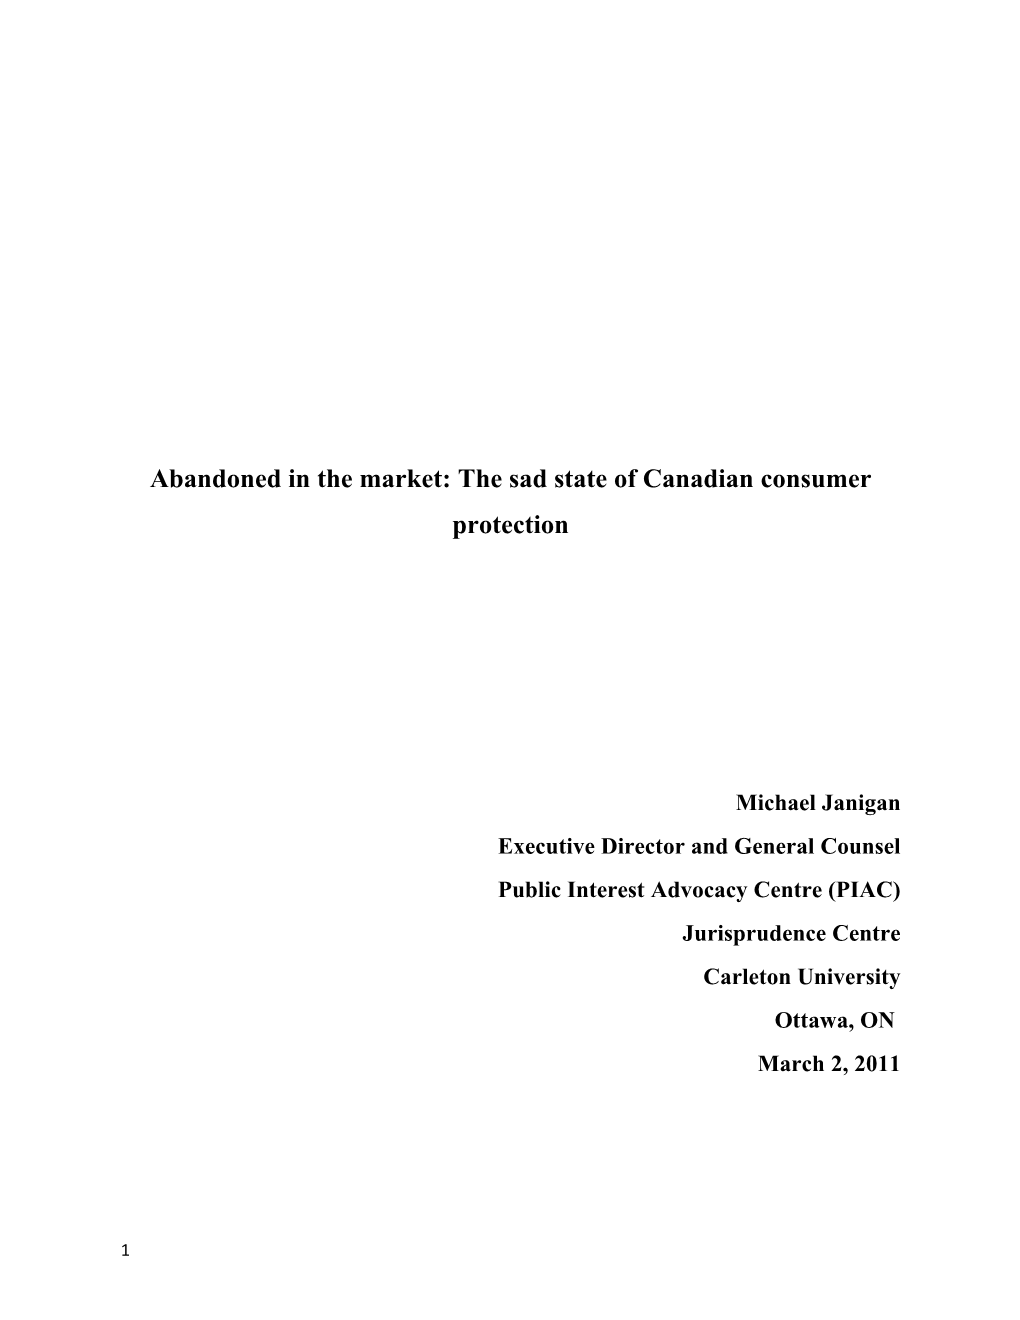 Abandoned in the Market: the Sad State of Canadian Consumer Protection